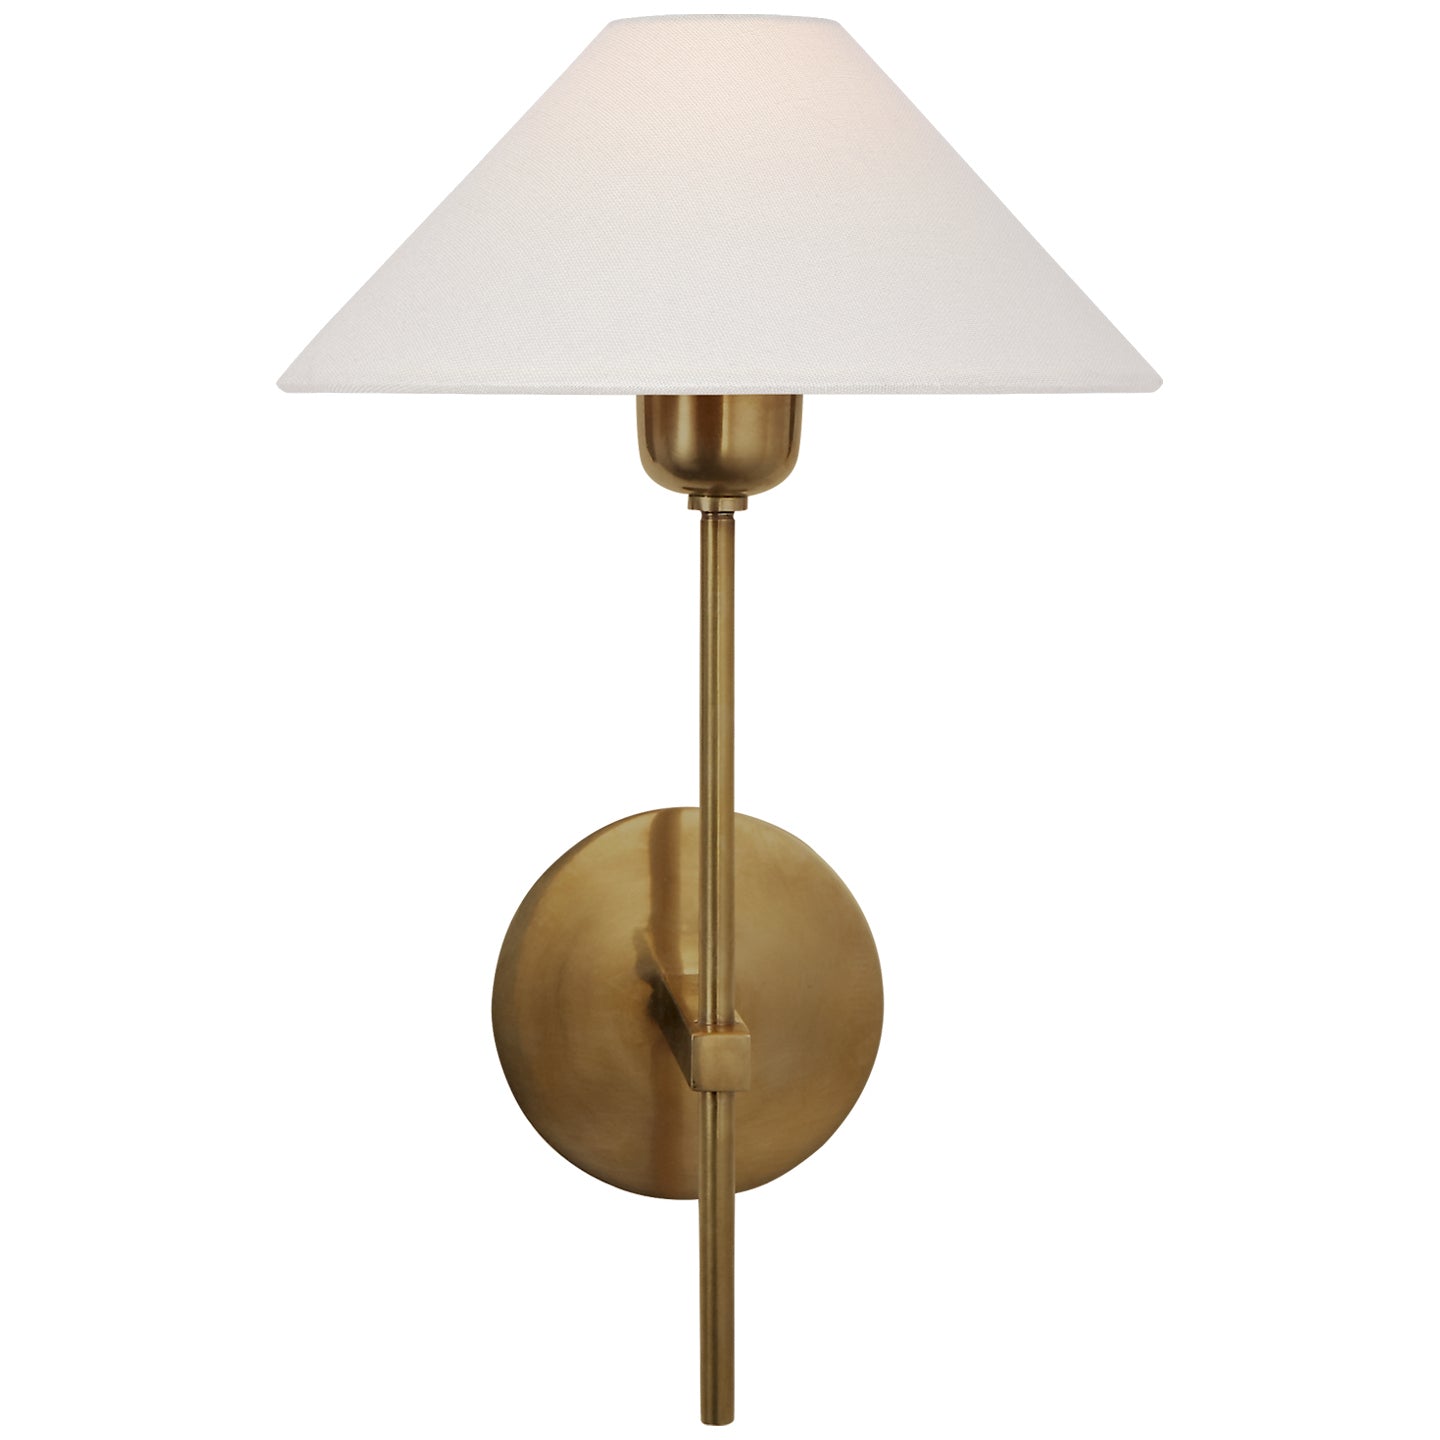 Visual Comfort Signature Canada - One Light Wall Sconce - Hackney - Hand-Rubbed Antique Brass- Union Lighting Luminaires Decor